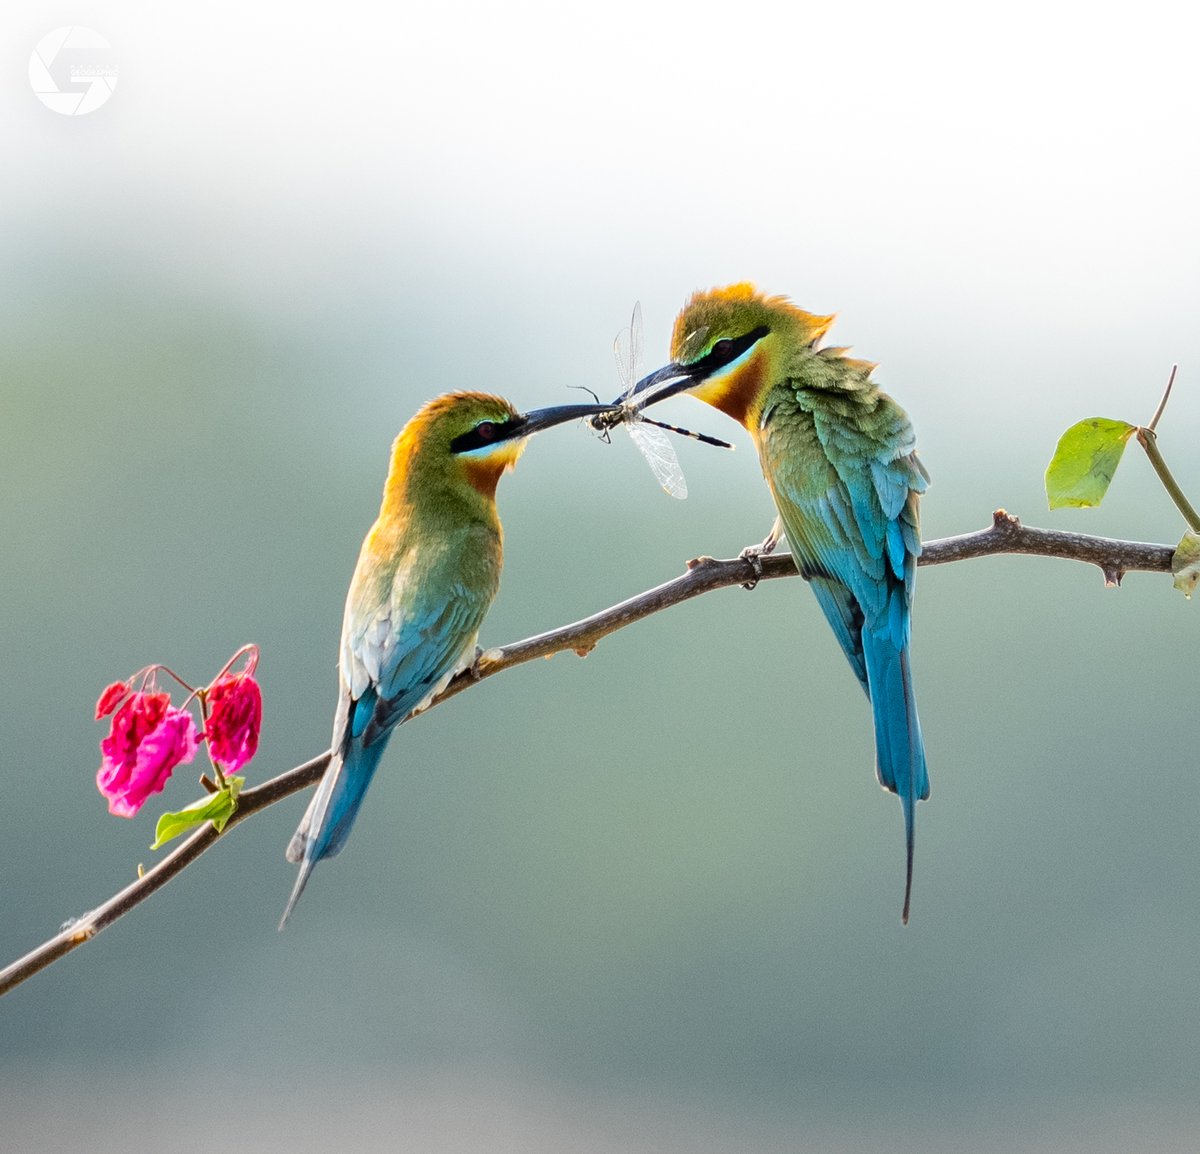 A pair of blue-tailed bee-eaters share a tasty dragonfly in Chengmai, Hainan
Photographer: Li Tianping
#hainangeo #birdwatching #beeeaters #粟喉蜂虎 #tropicalisland #photography